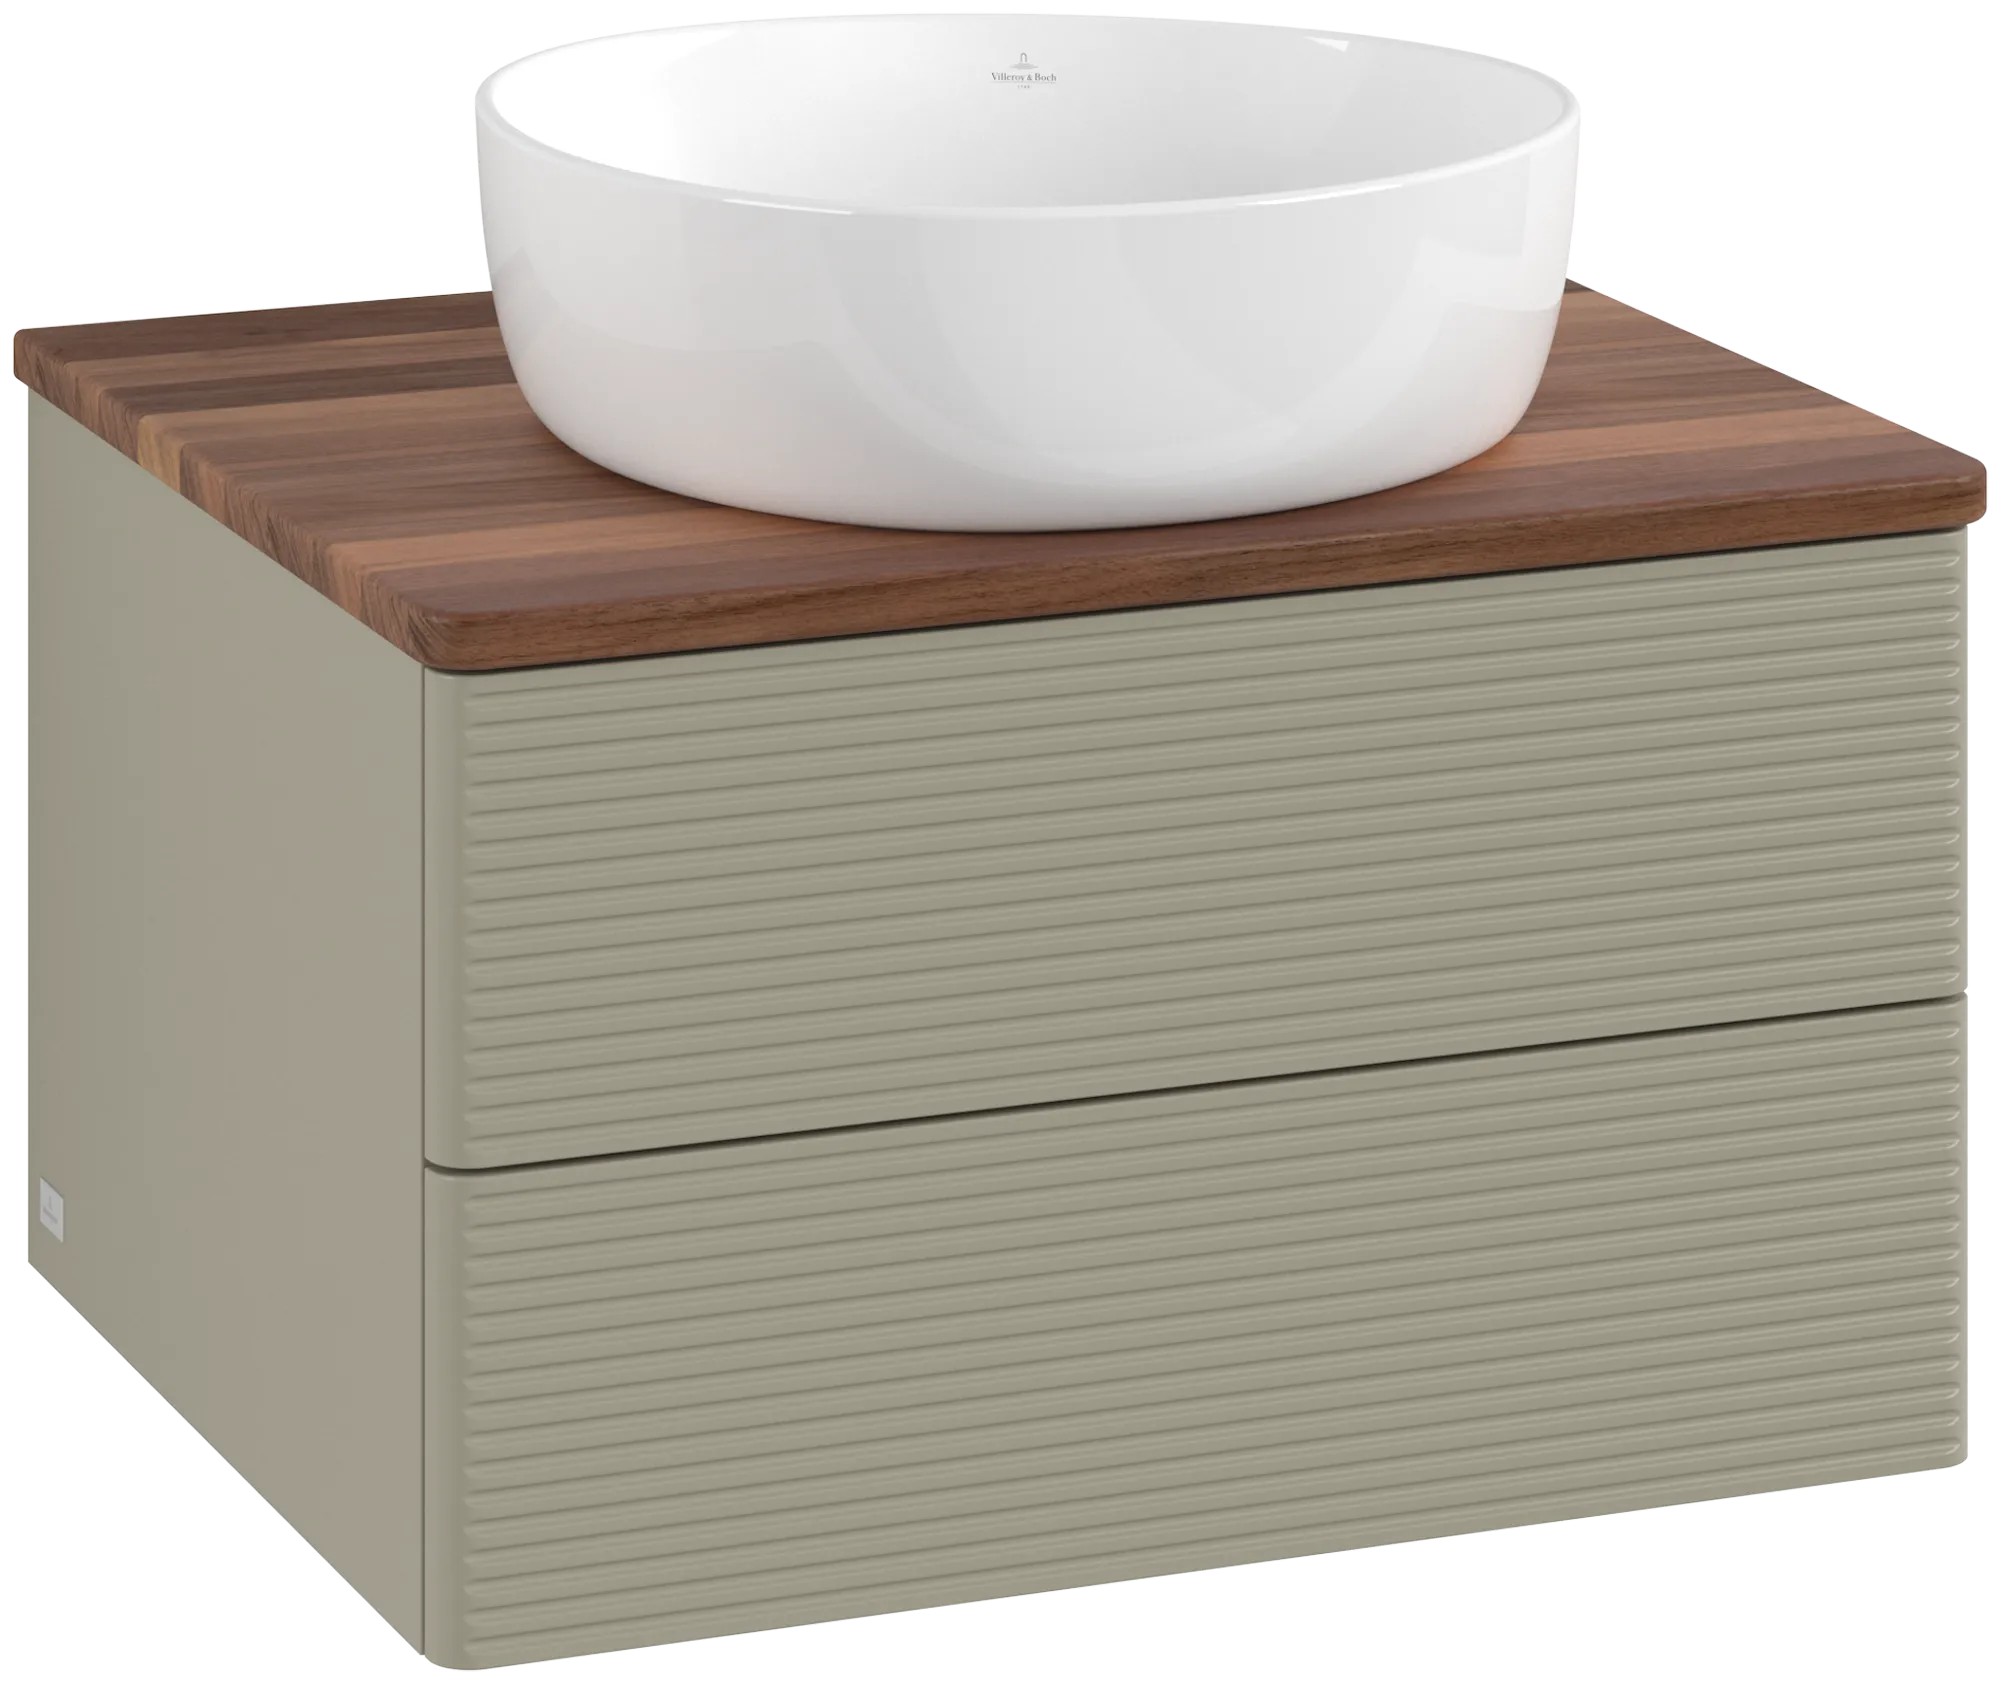 Picture of VILLEROY BOCH Antao Vanity unit, with lighting, 2 pull-out compartments, 600 x 360 x 500 mm, Front with grain texture, Stone Grey Matt Lacquer / Warm Walnut #L18112HK